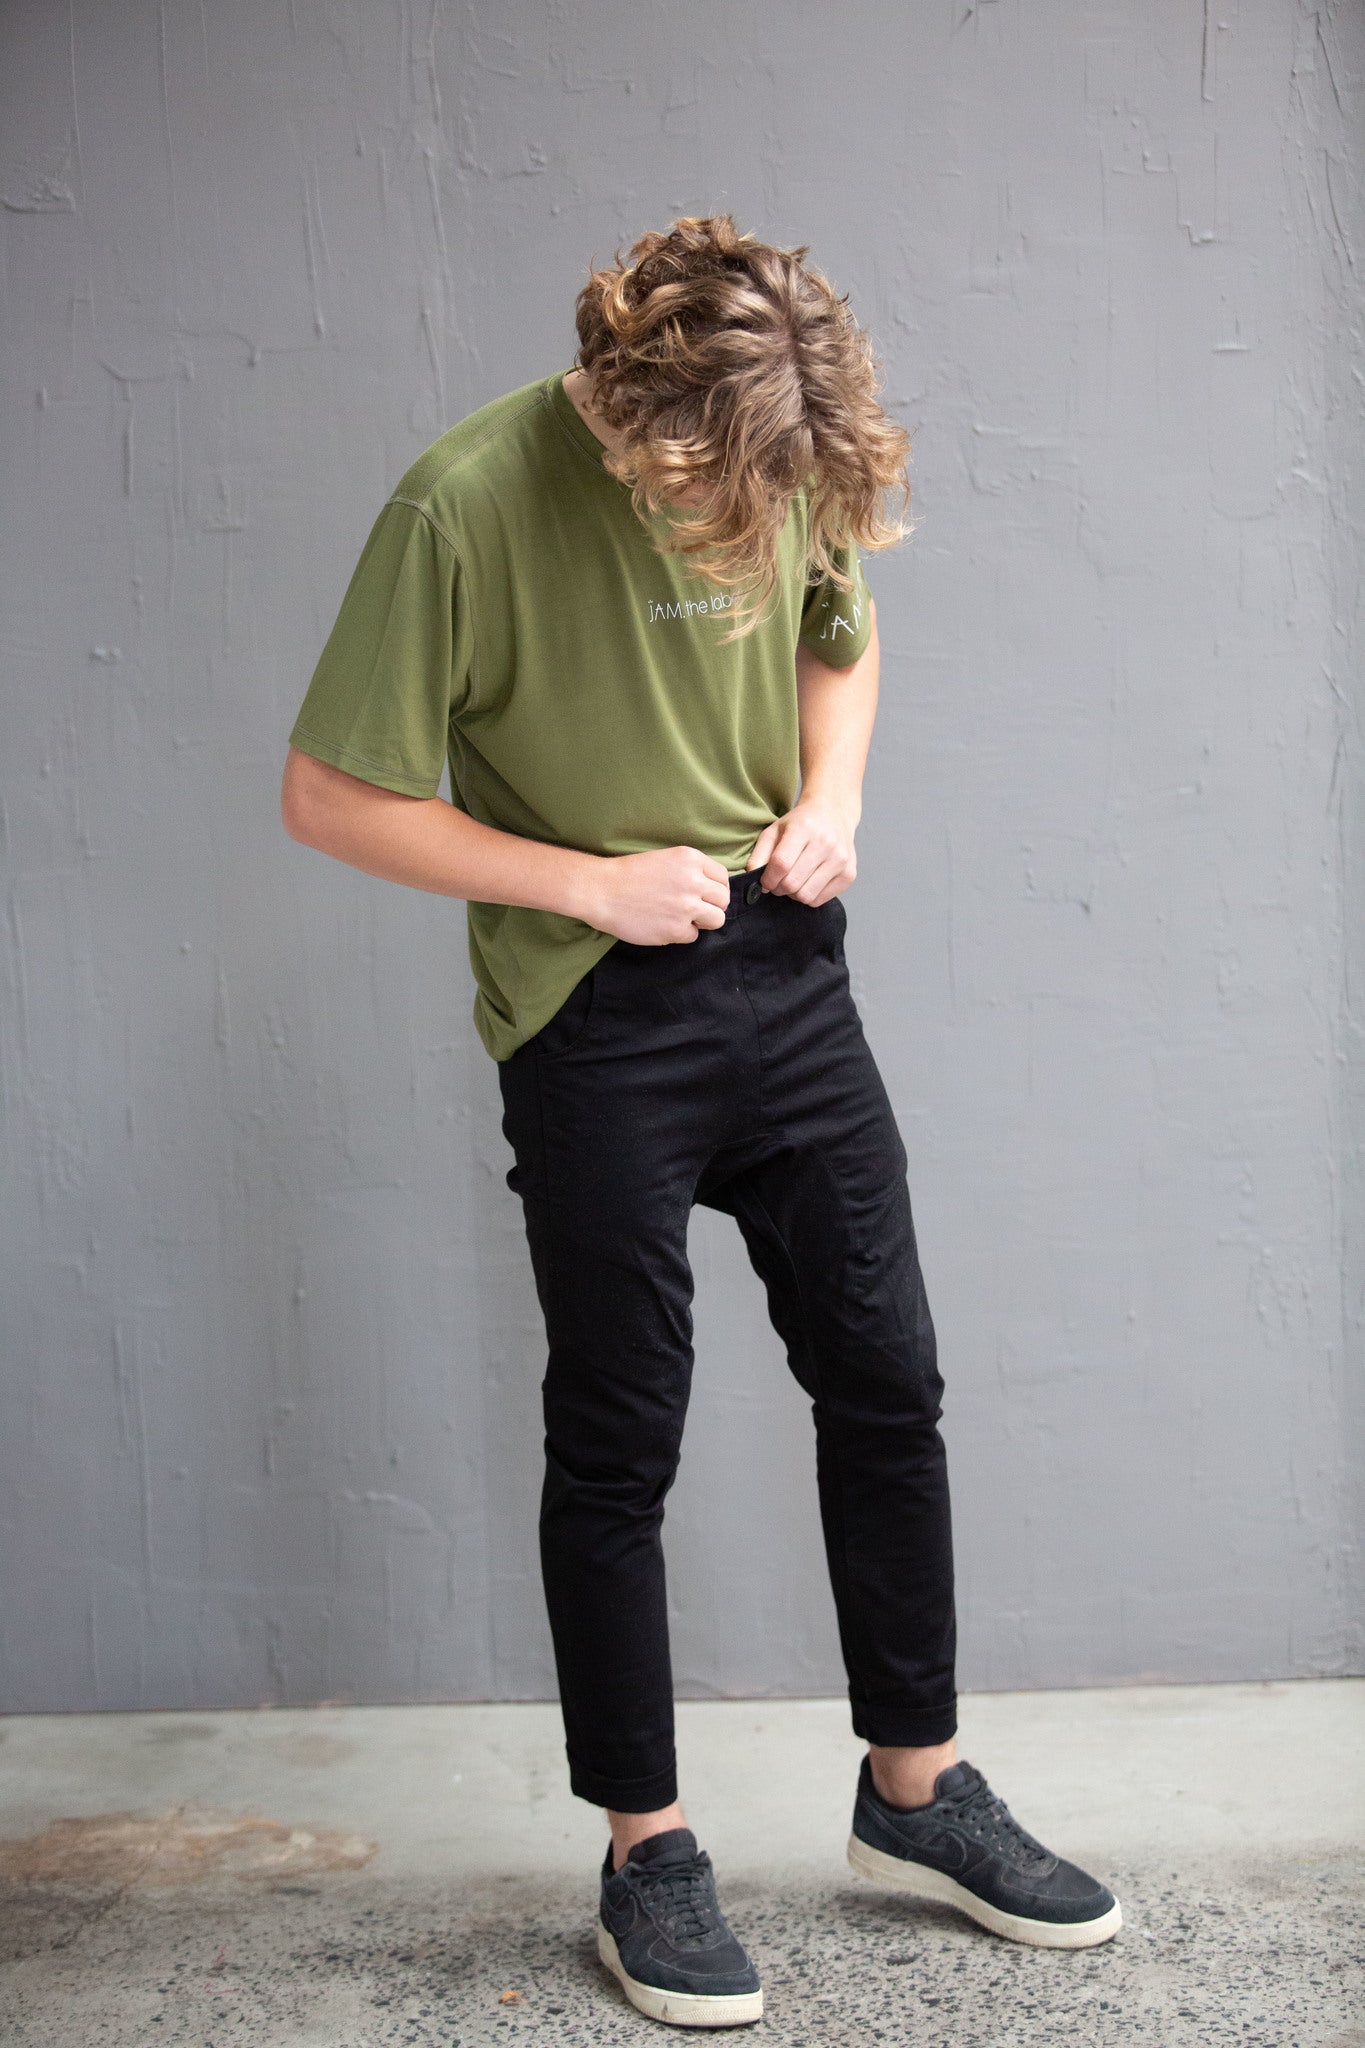 A young white man with blonde curly hair is standing in front of a grey wall. He is looking down at himself. He is wearing an olive green top, black chinos and black shoes.